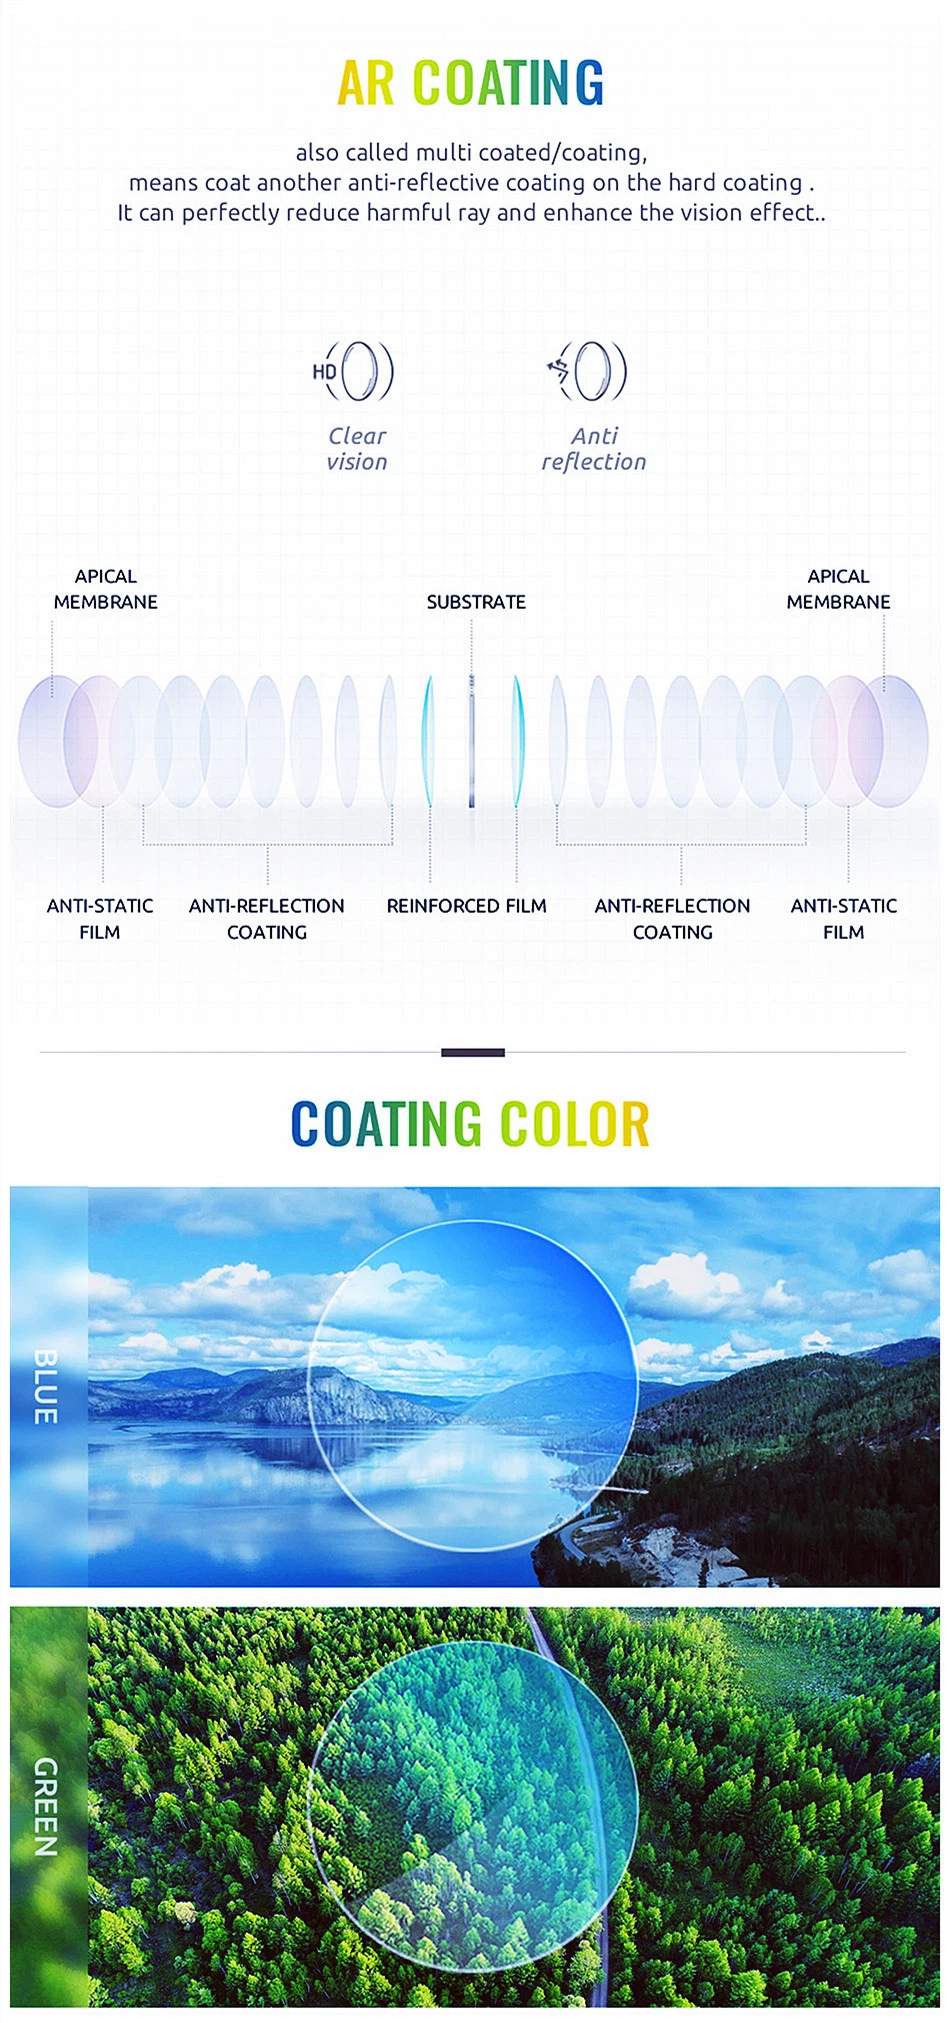 Photochromatic Lens Semi-Finished 1.56 Photochromic Round Top Hmc Spectacle Lenses Manufacturers